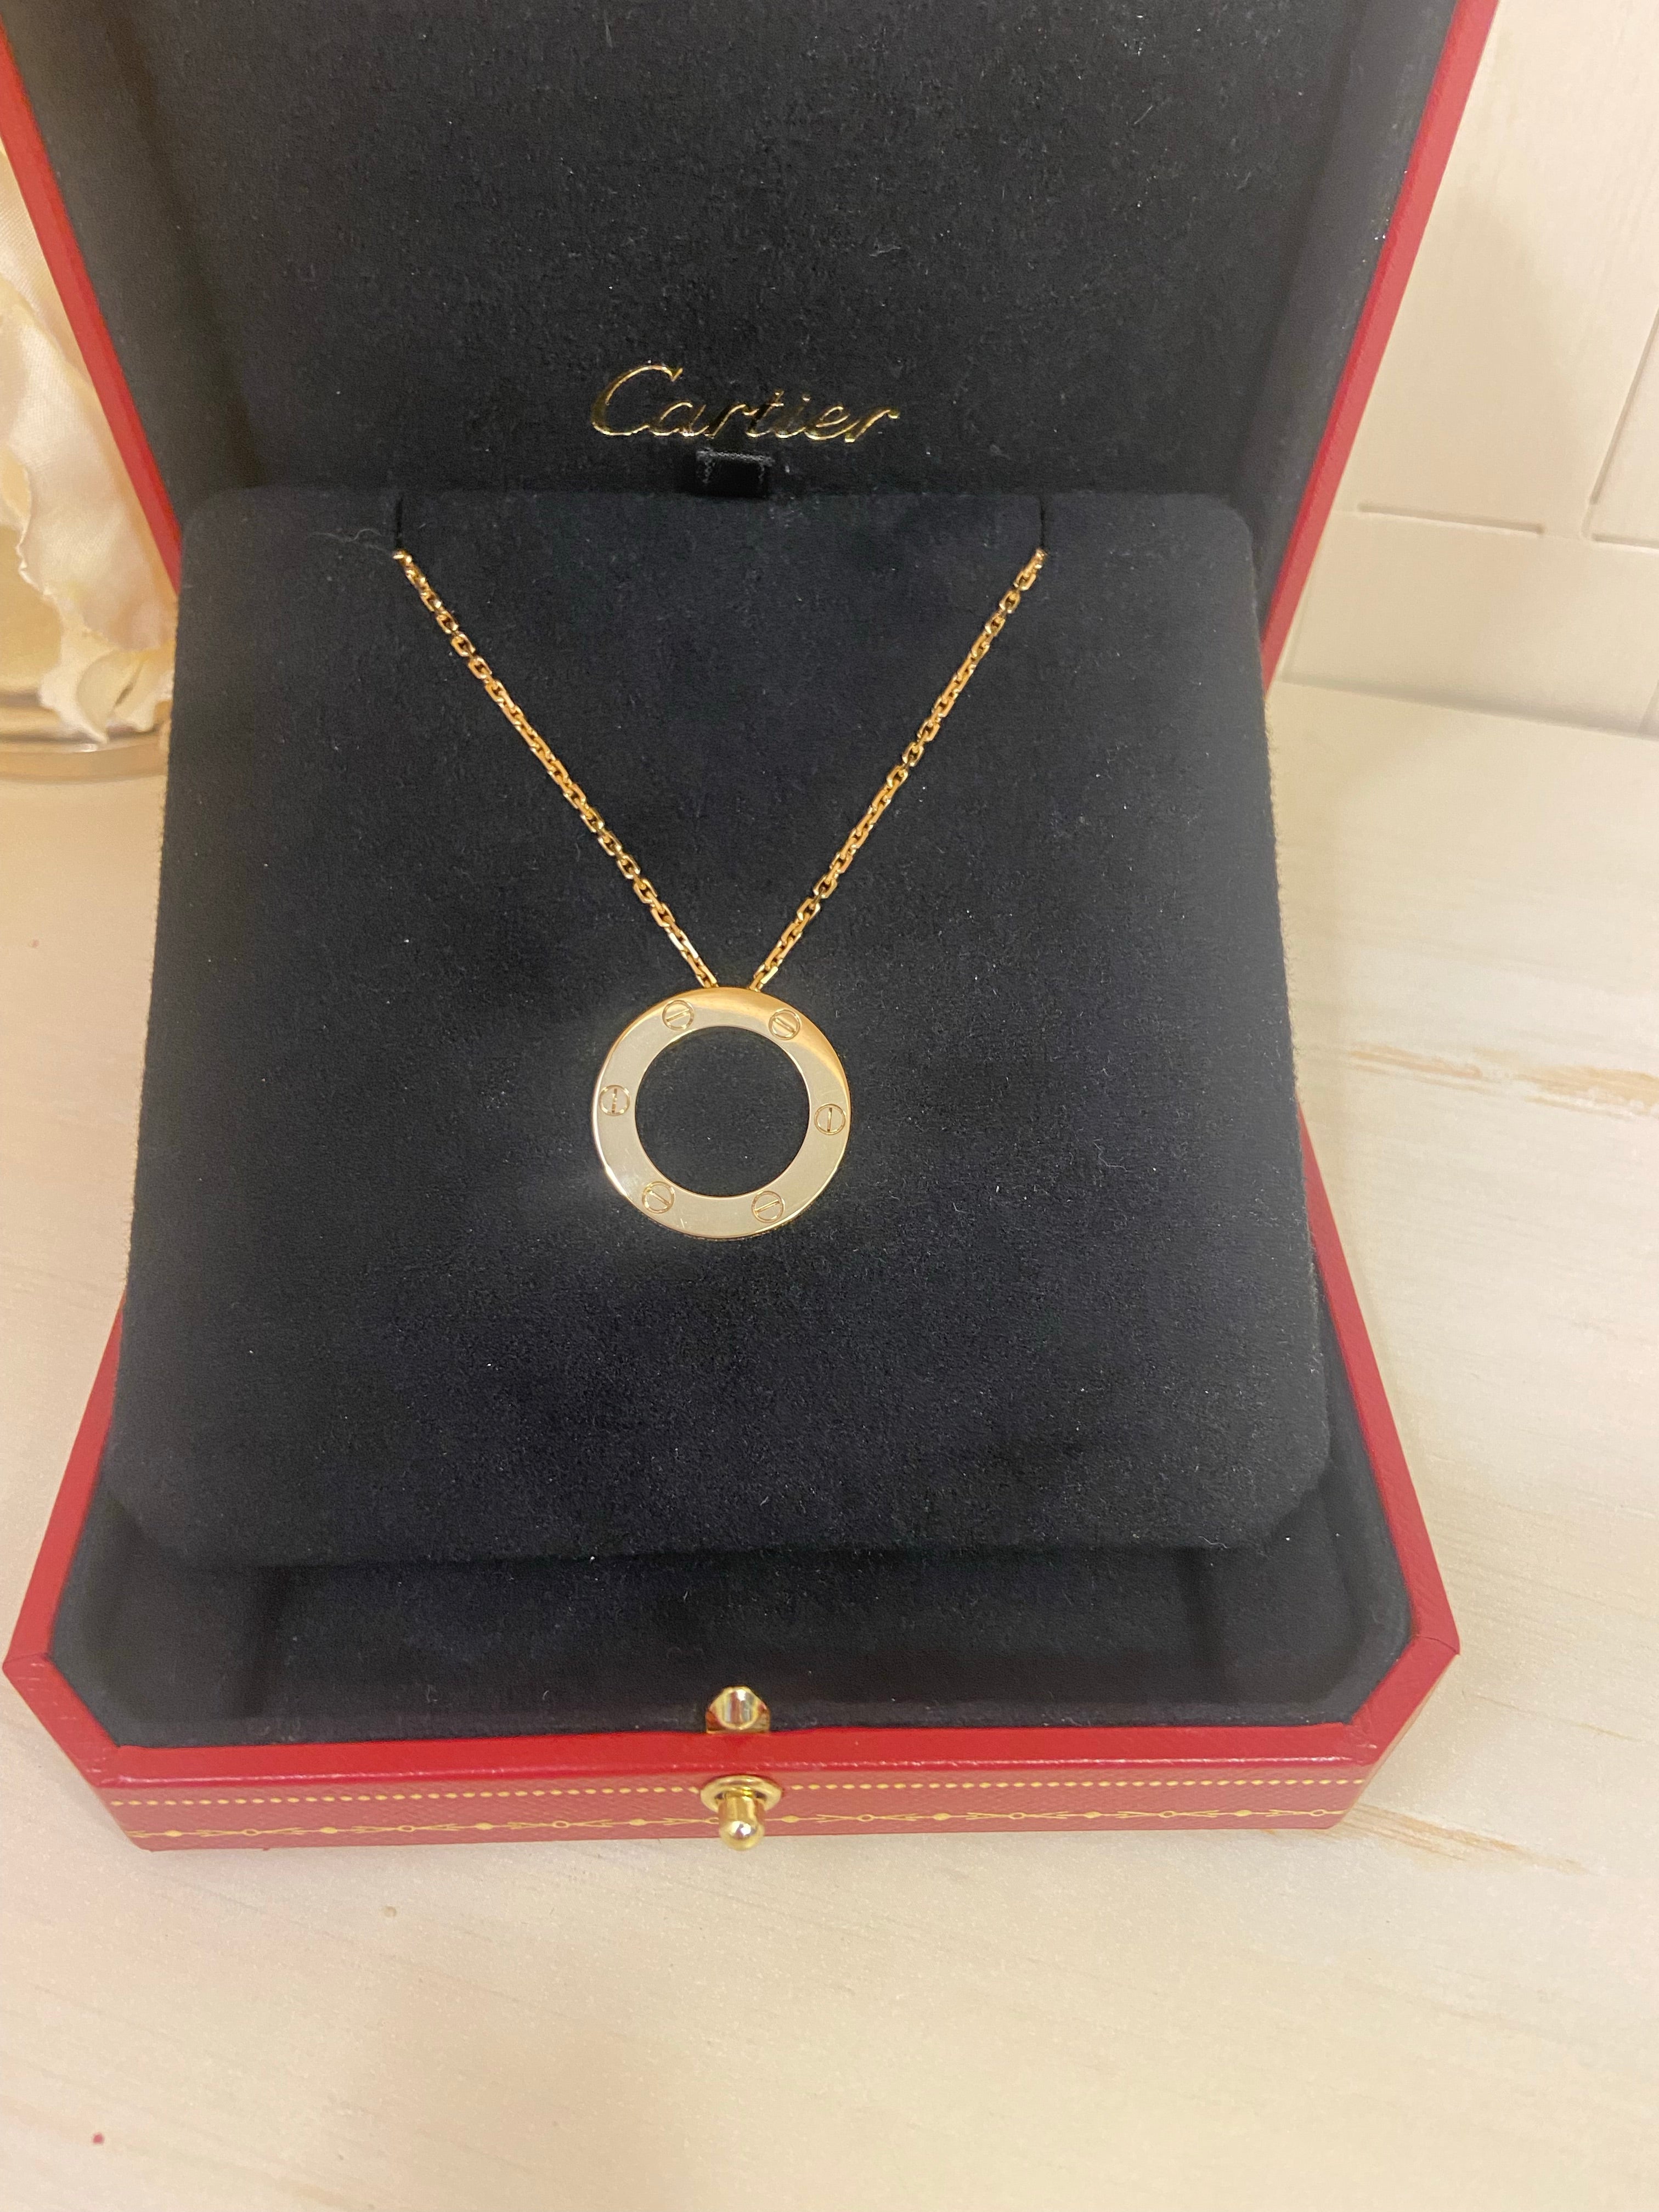 Cartier 18Kt Yellow Gold Love Necklace